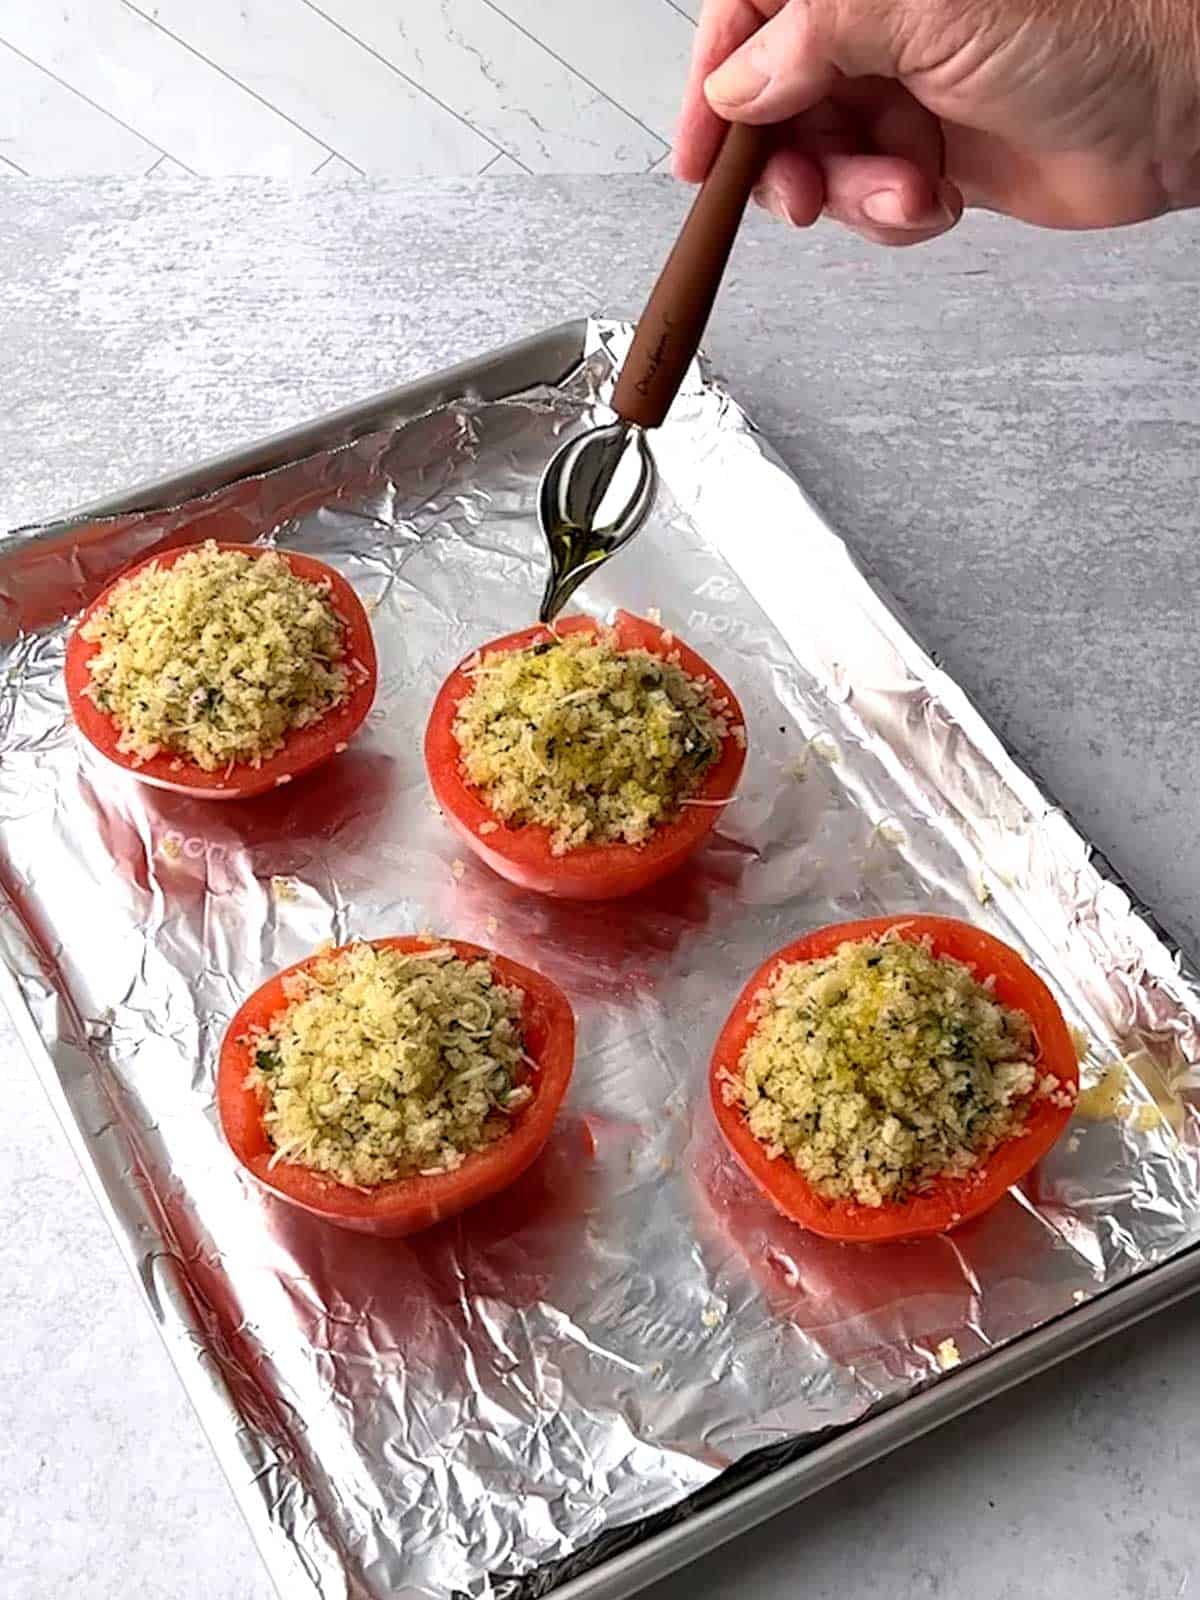 Drizzling olive oil on top of stuffed tomatoes.